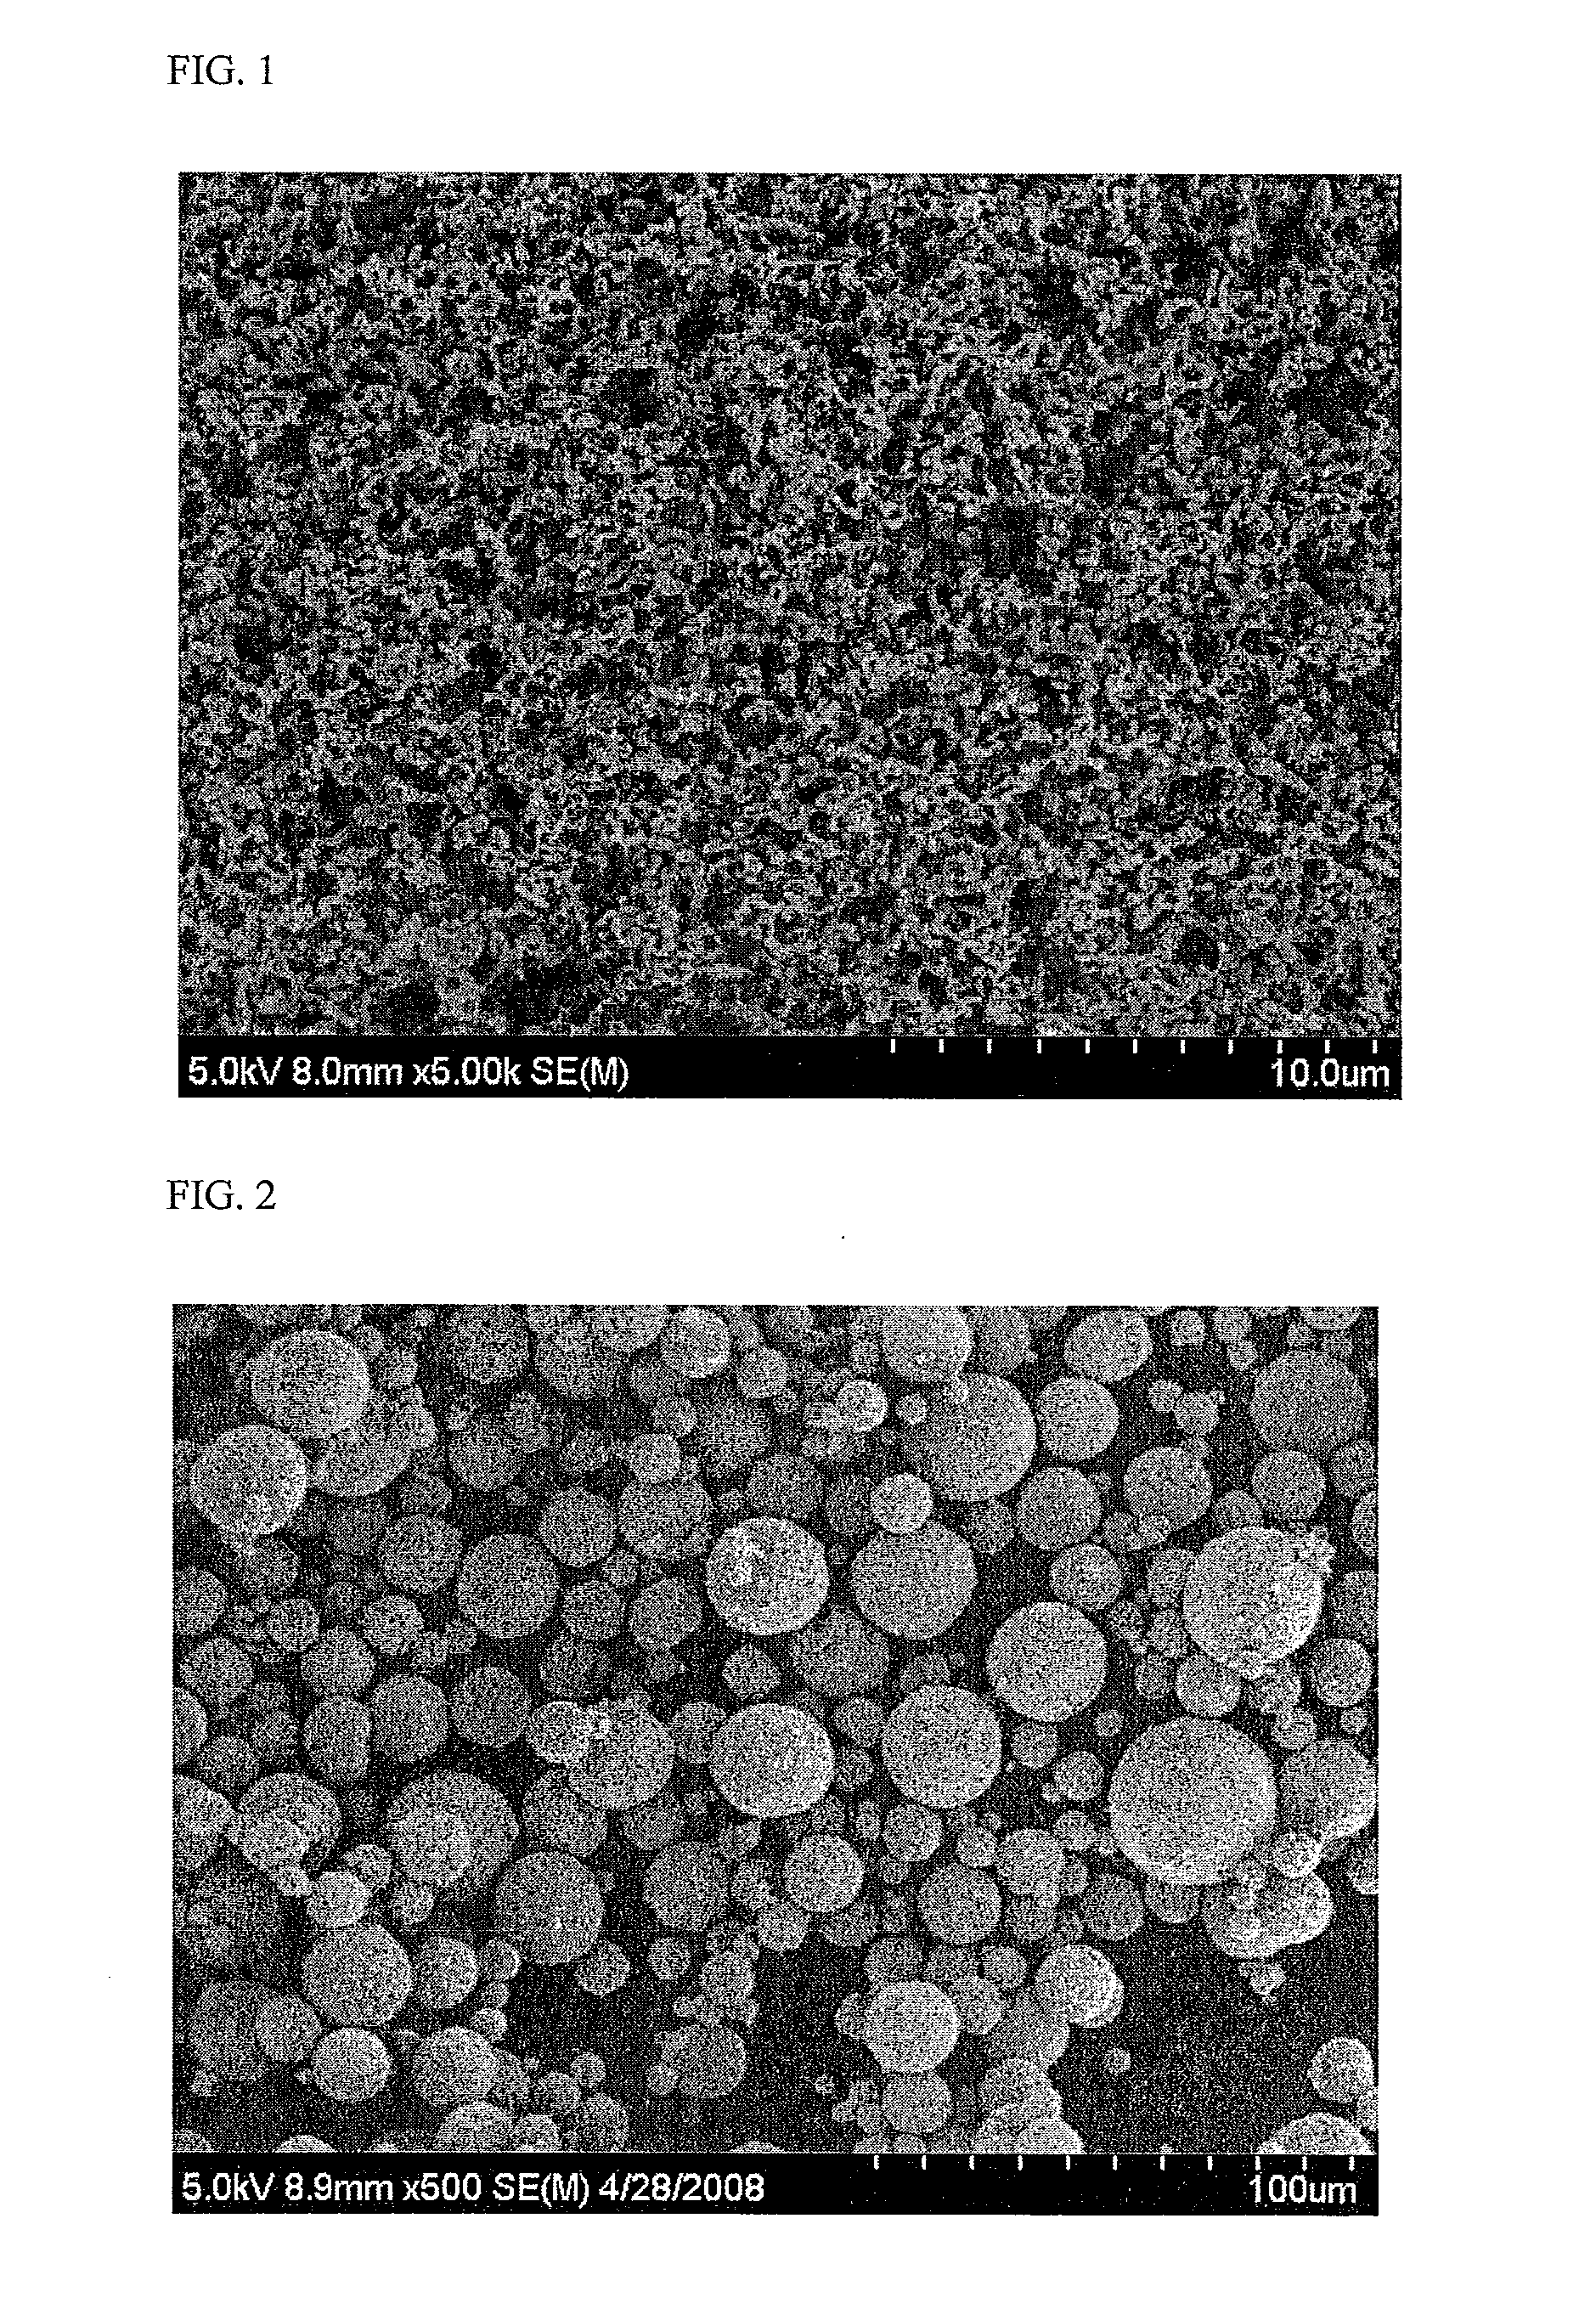 Lithium iron phosphate having olivine structure and method for preparing the same